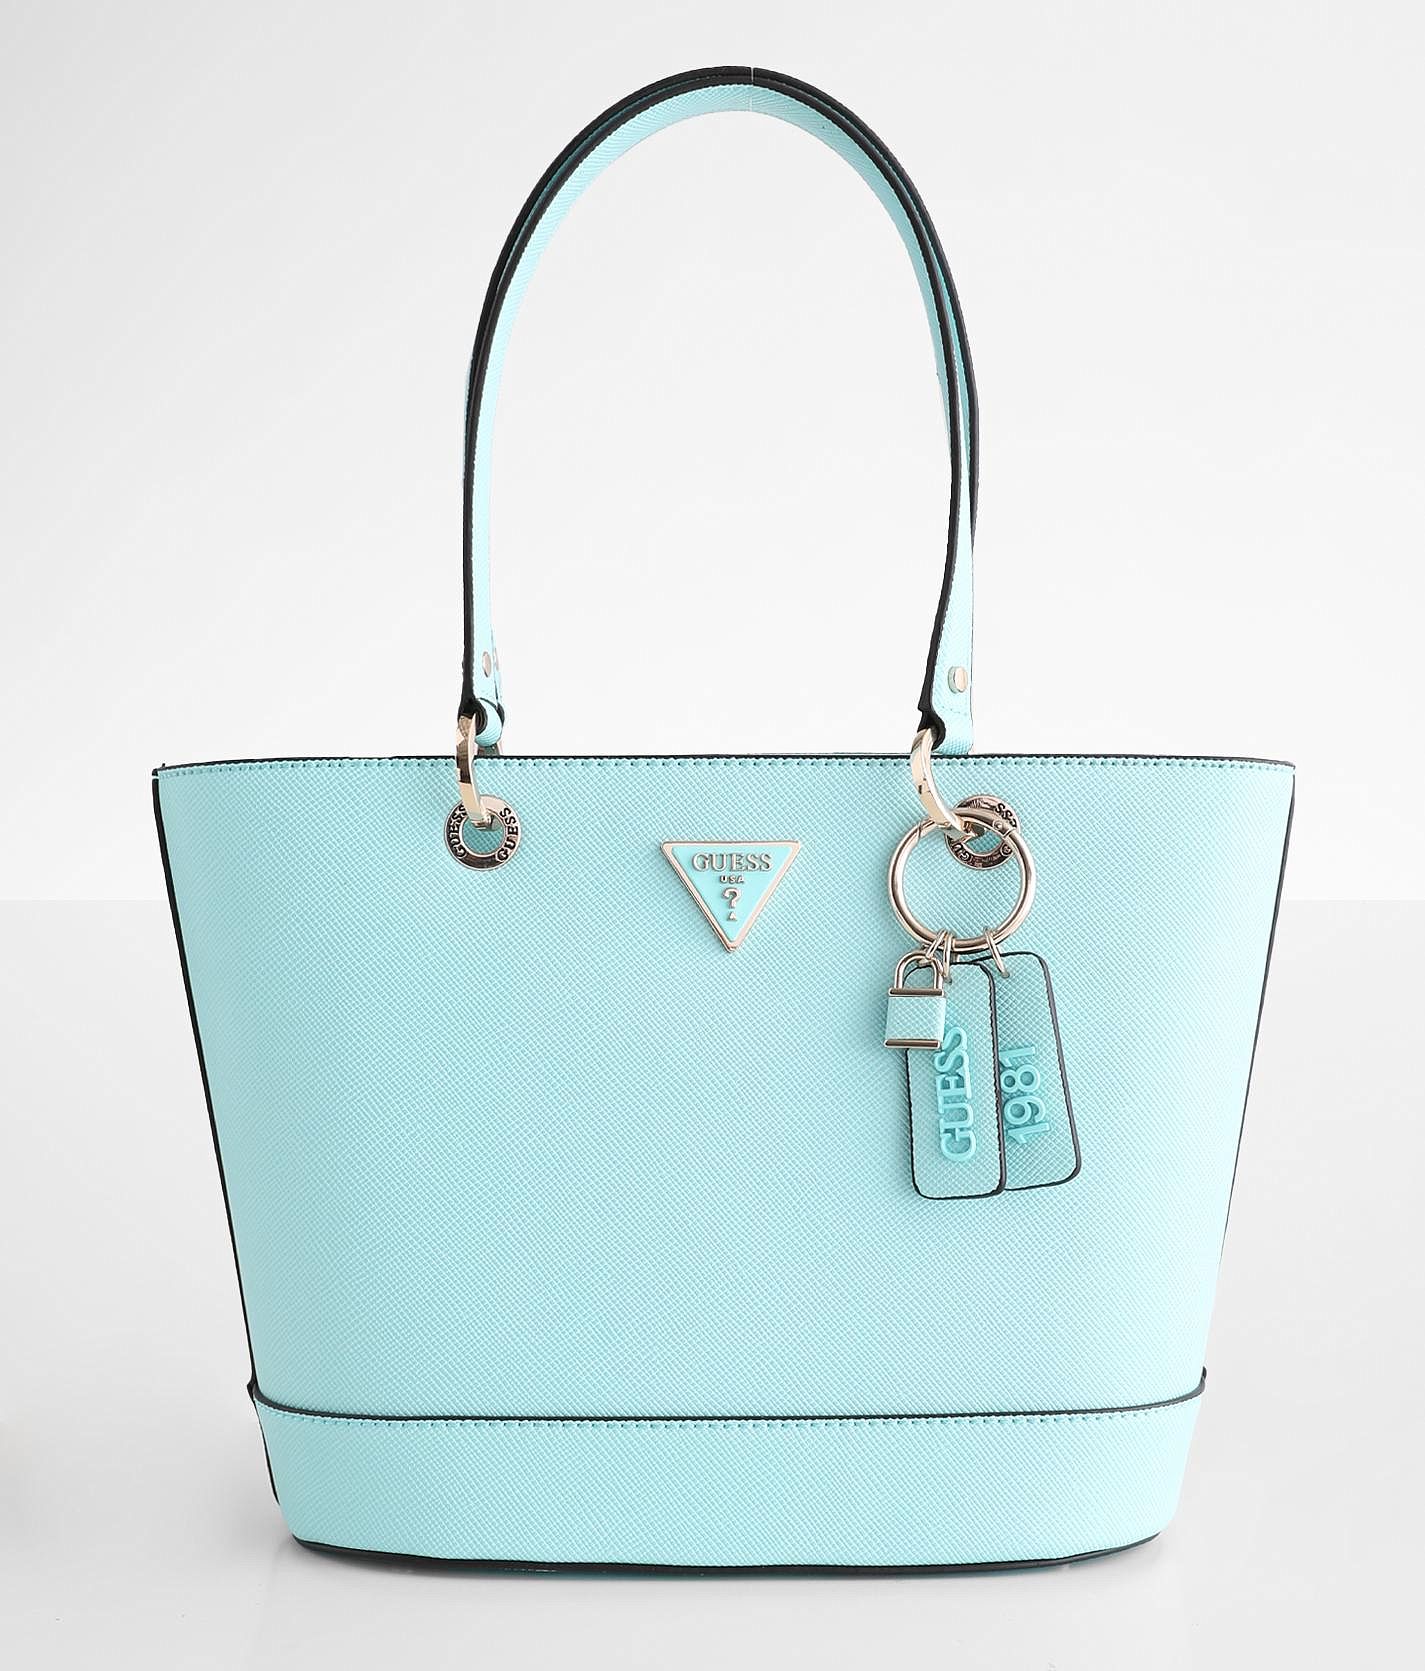 Guess Noelle Elite Tote Purse - Women's Bags in Turquoise